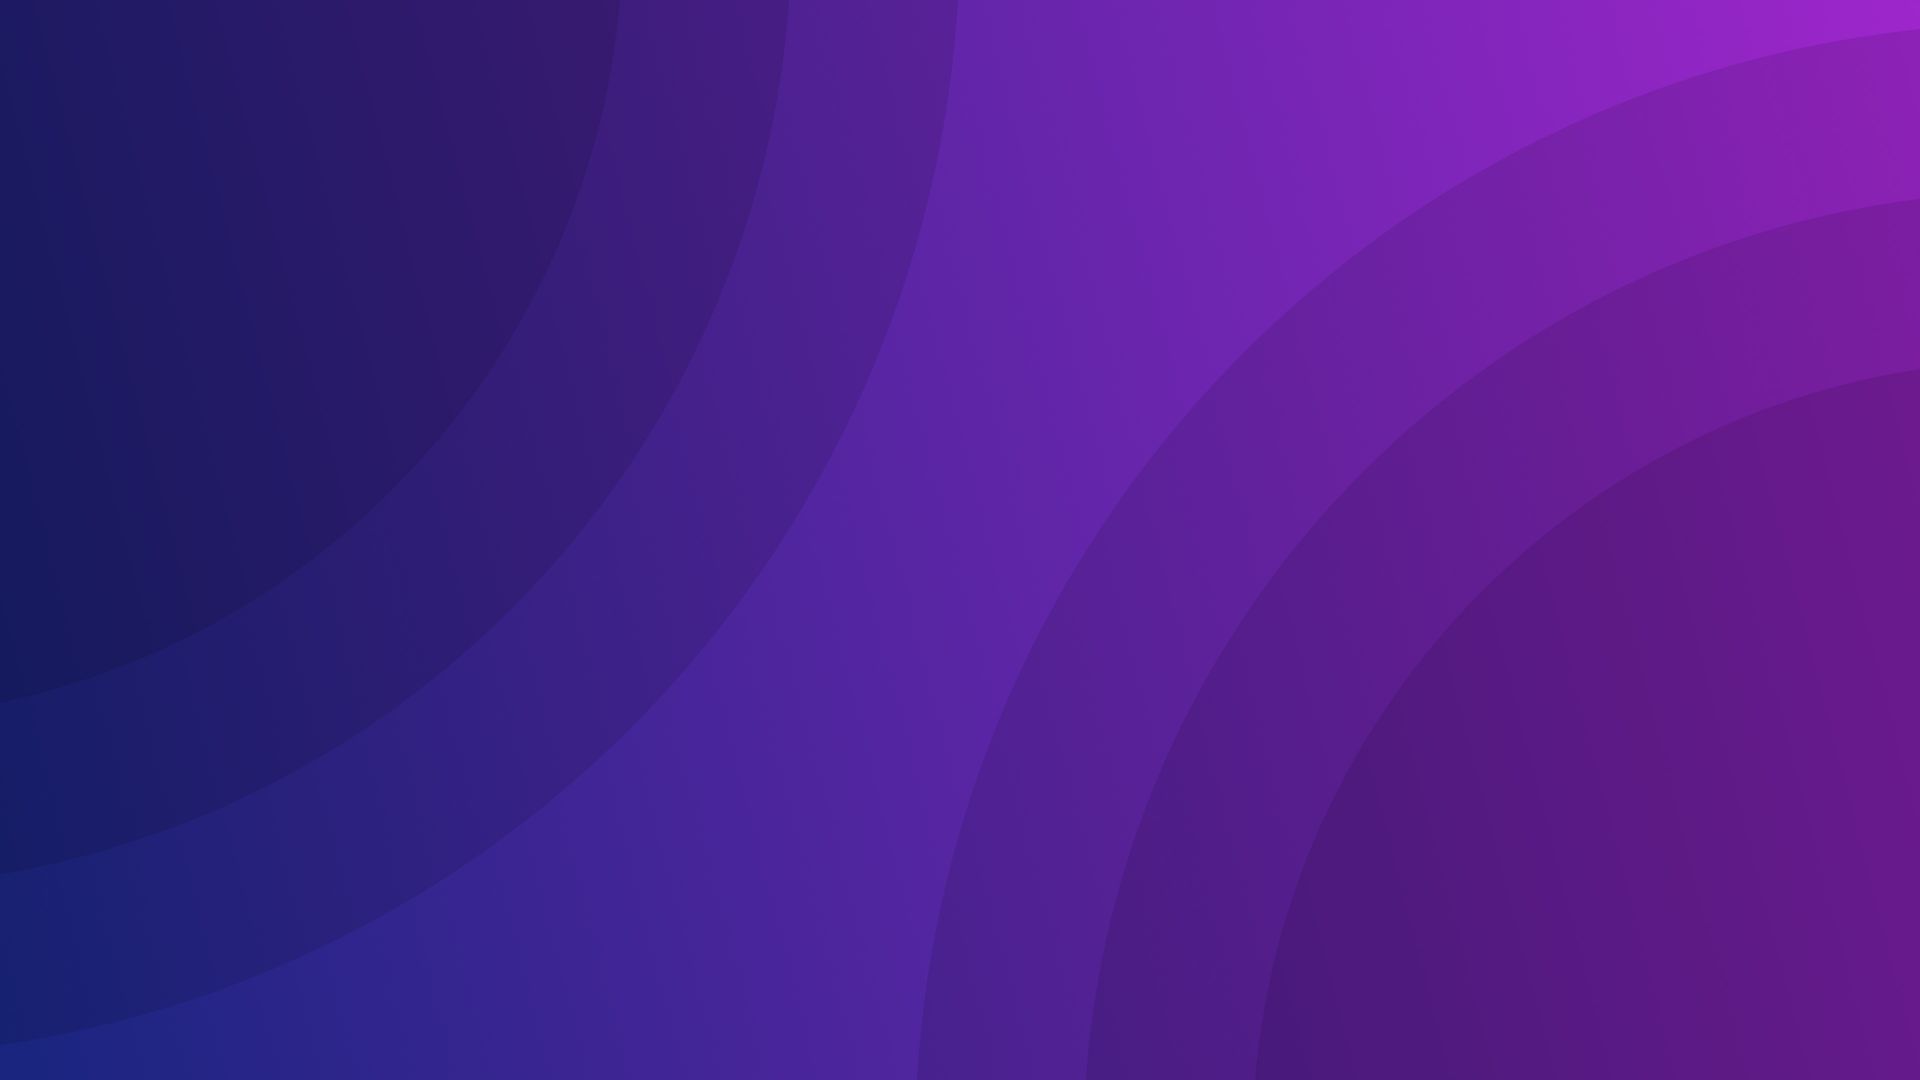 Download wallpaper 2560x1440 gradient purple blue abstract dual wide  169 2560x1440 hd background 14955